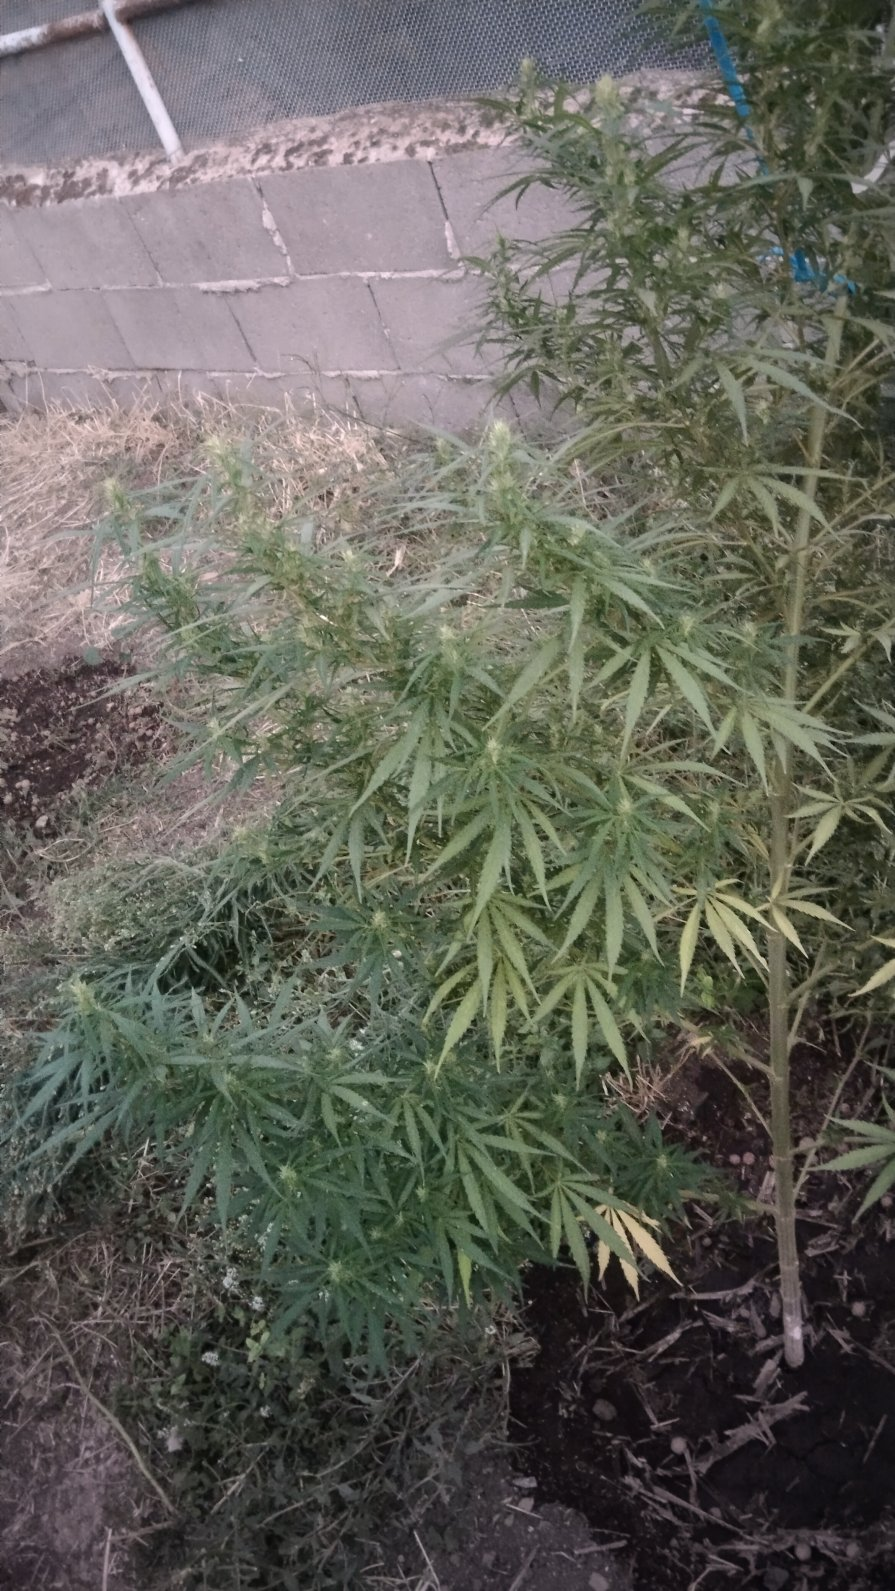 Outdoor Sativa Cultivation At 39N Inland, At 2950 Feet, 900 Metres 